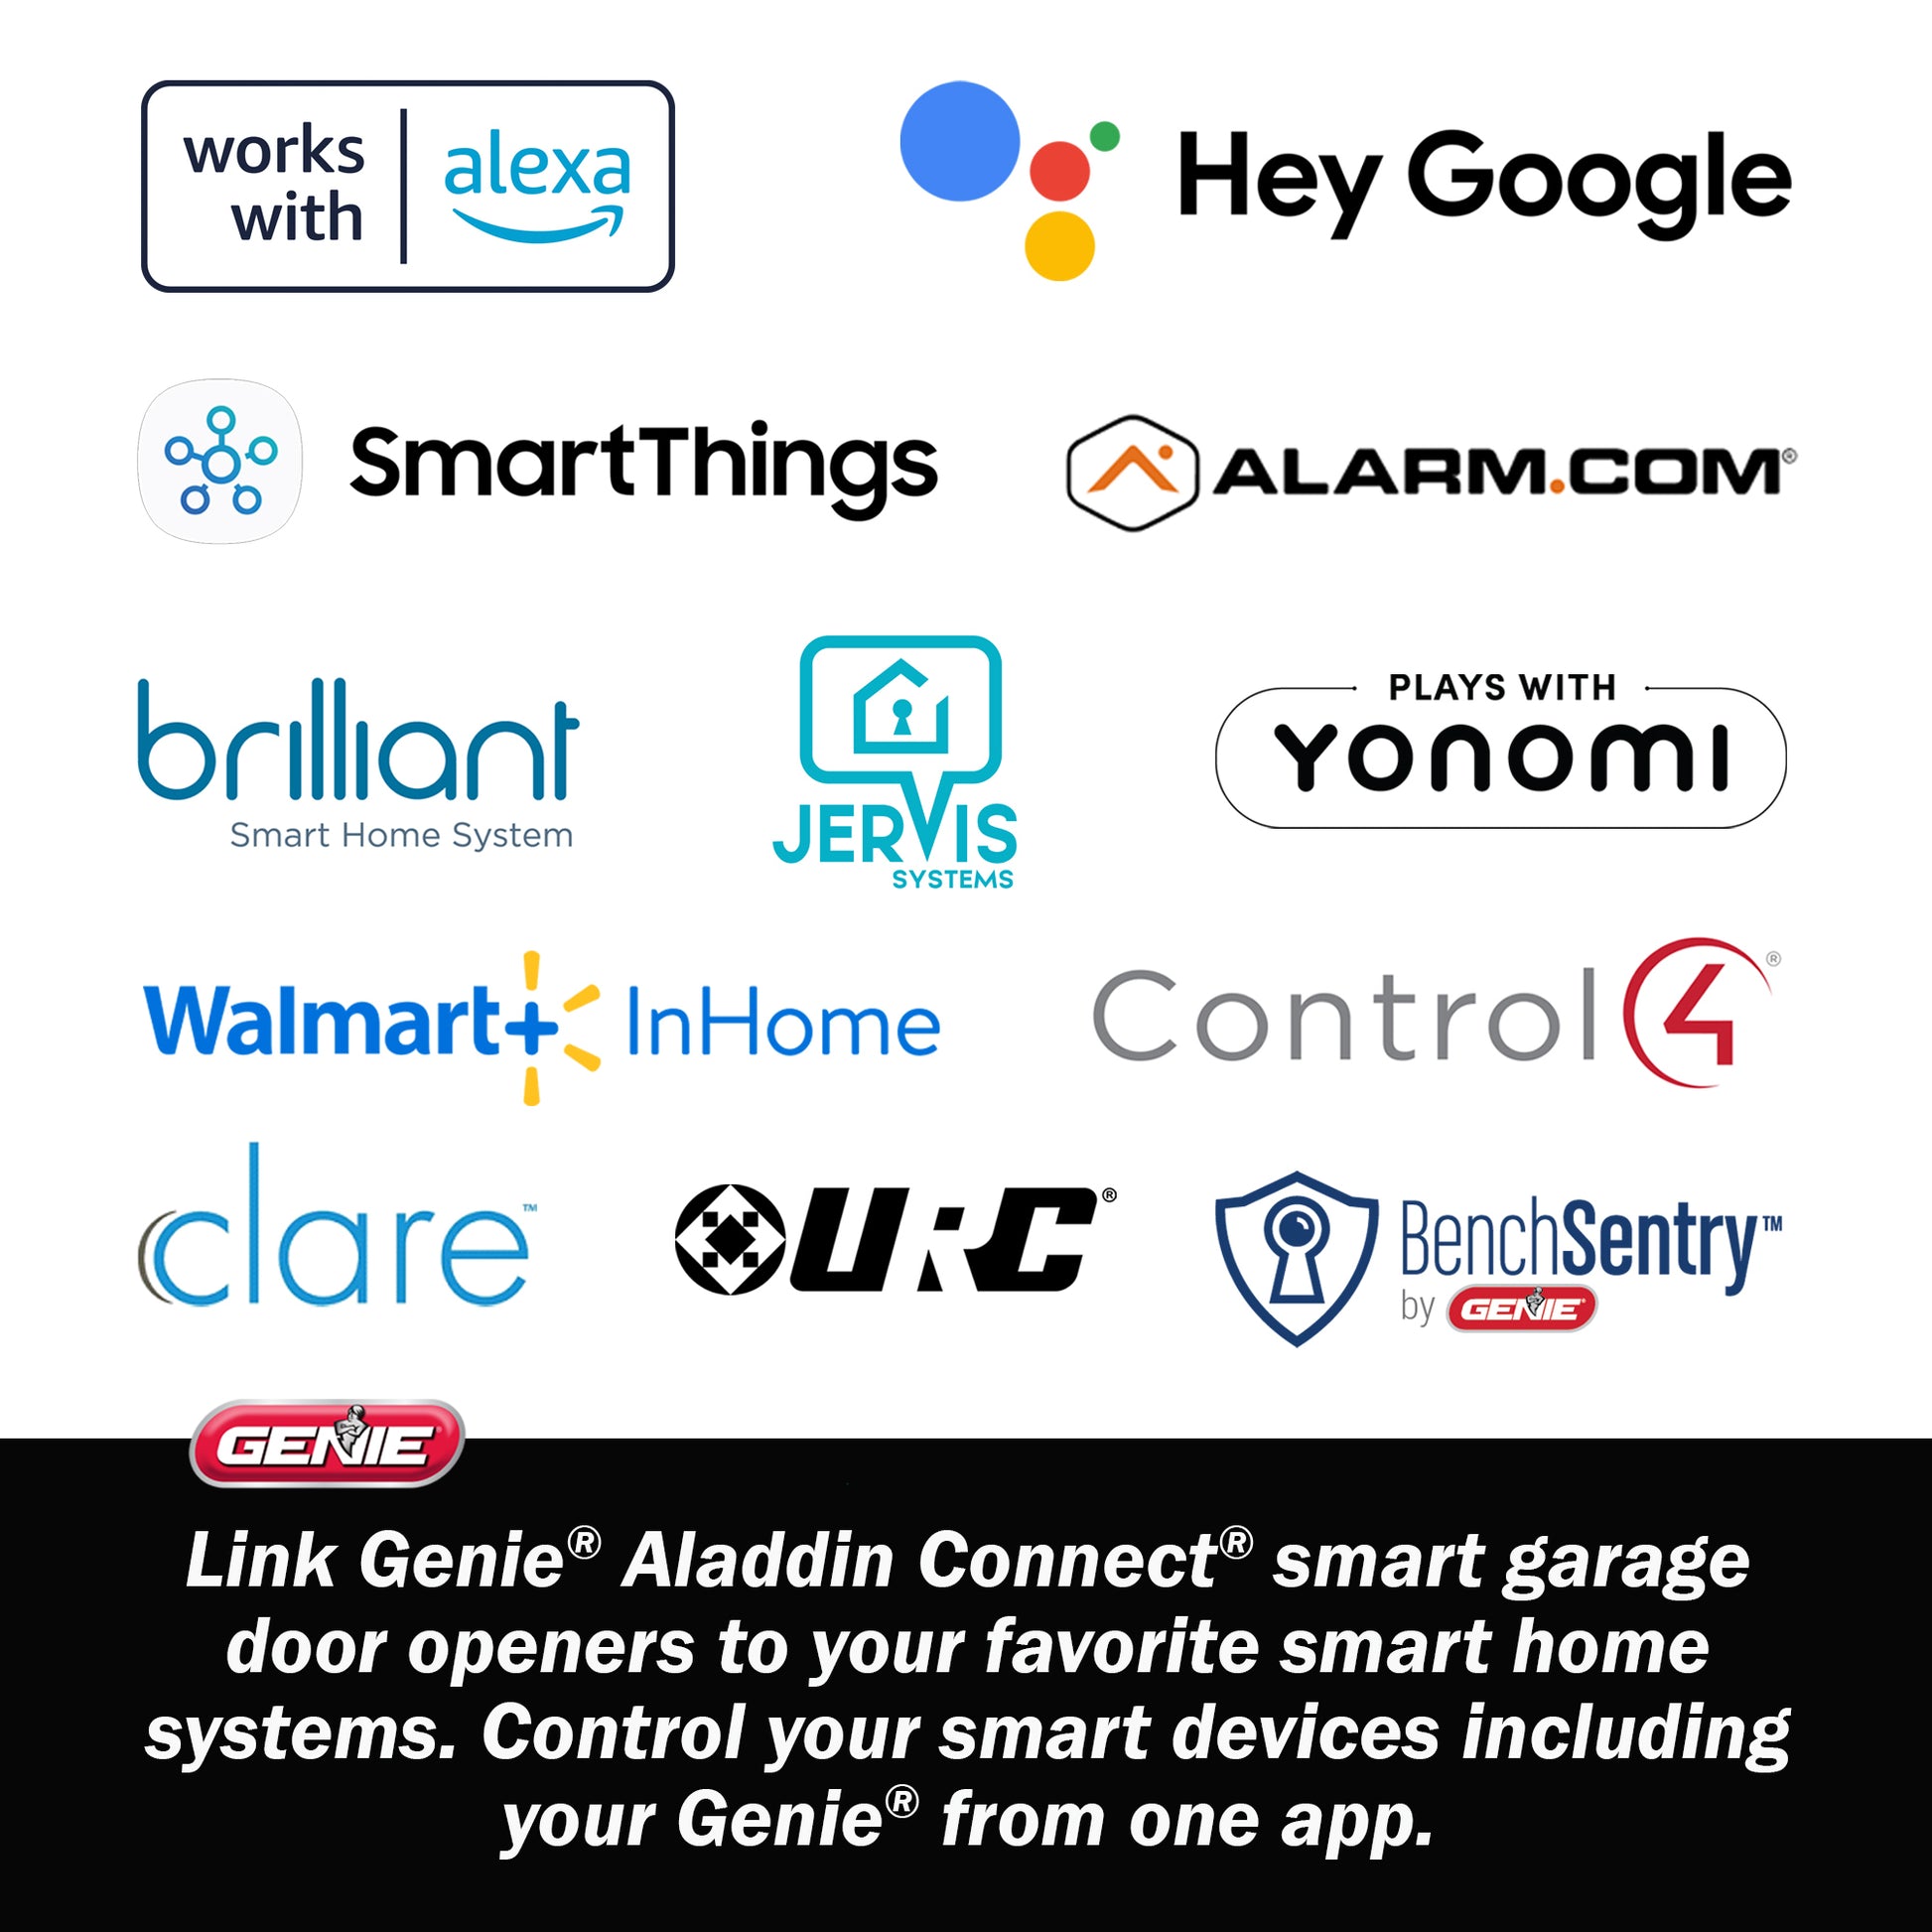 Works with Smart Home Partners such as Alexa, SmartThings, Hey Google and more